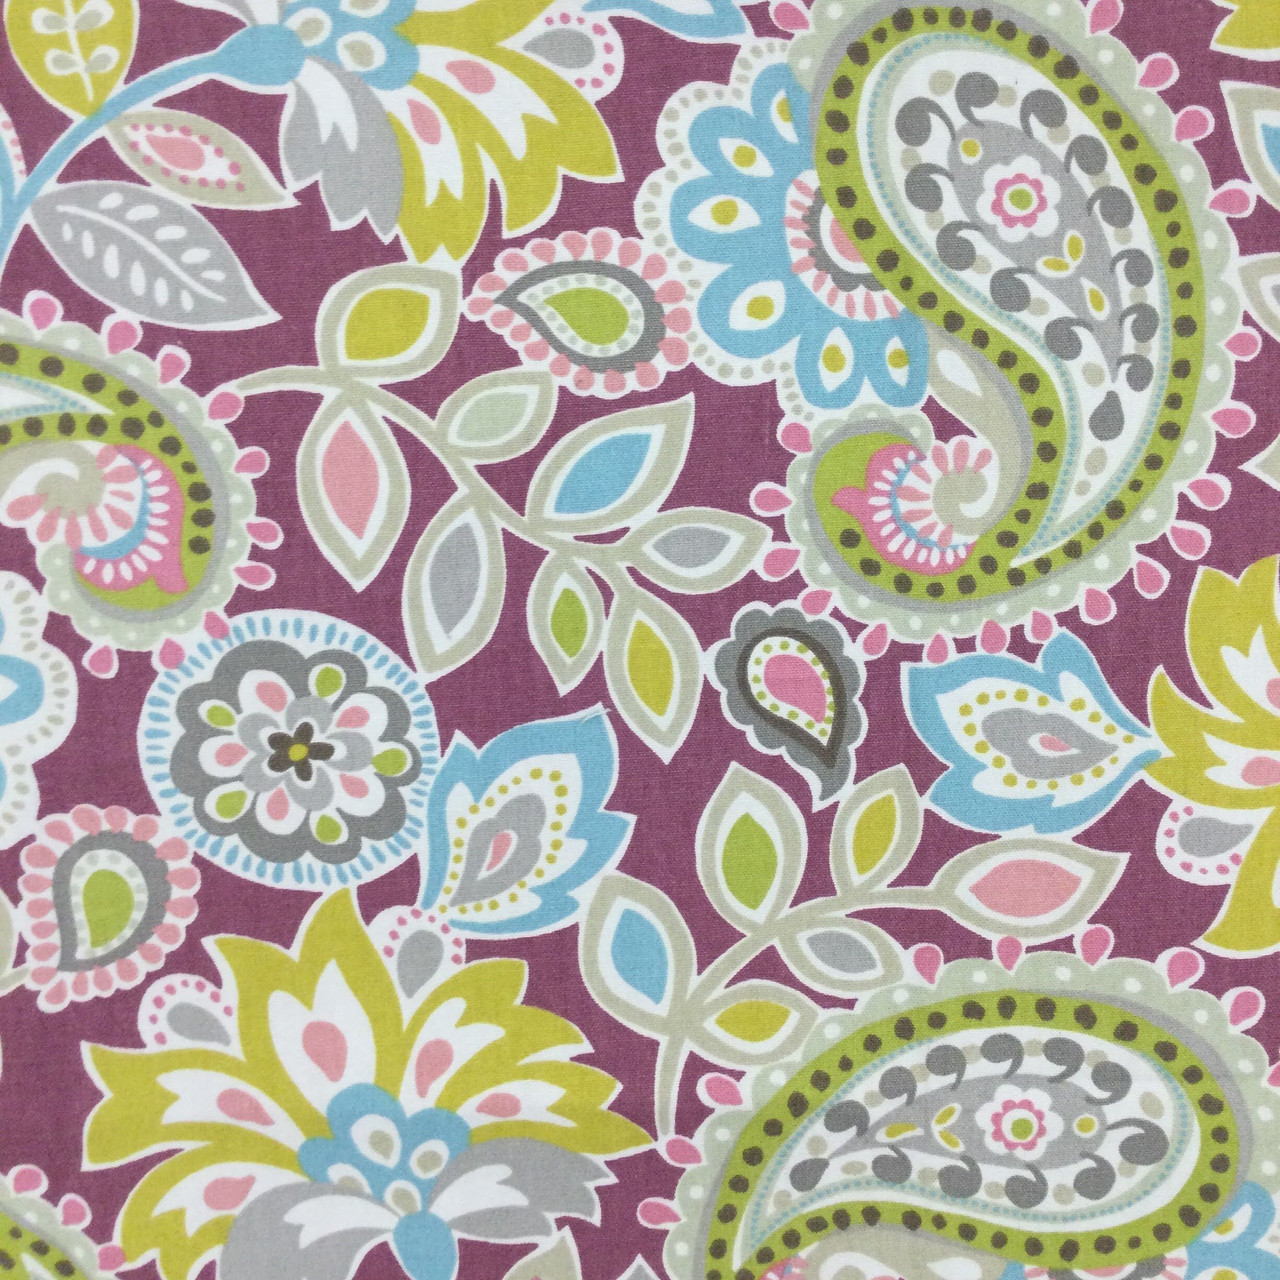 Paisley Fabric  40% Off - Free Shipping (Samples)